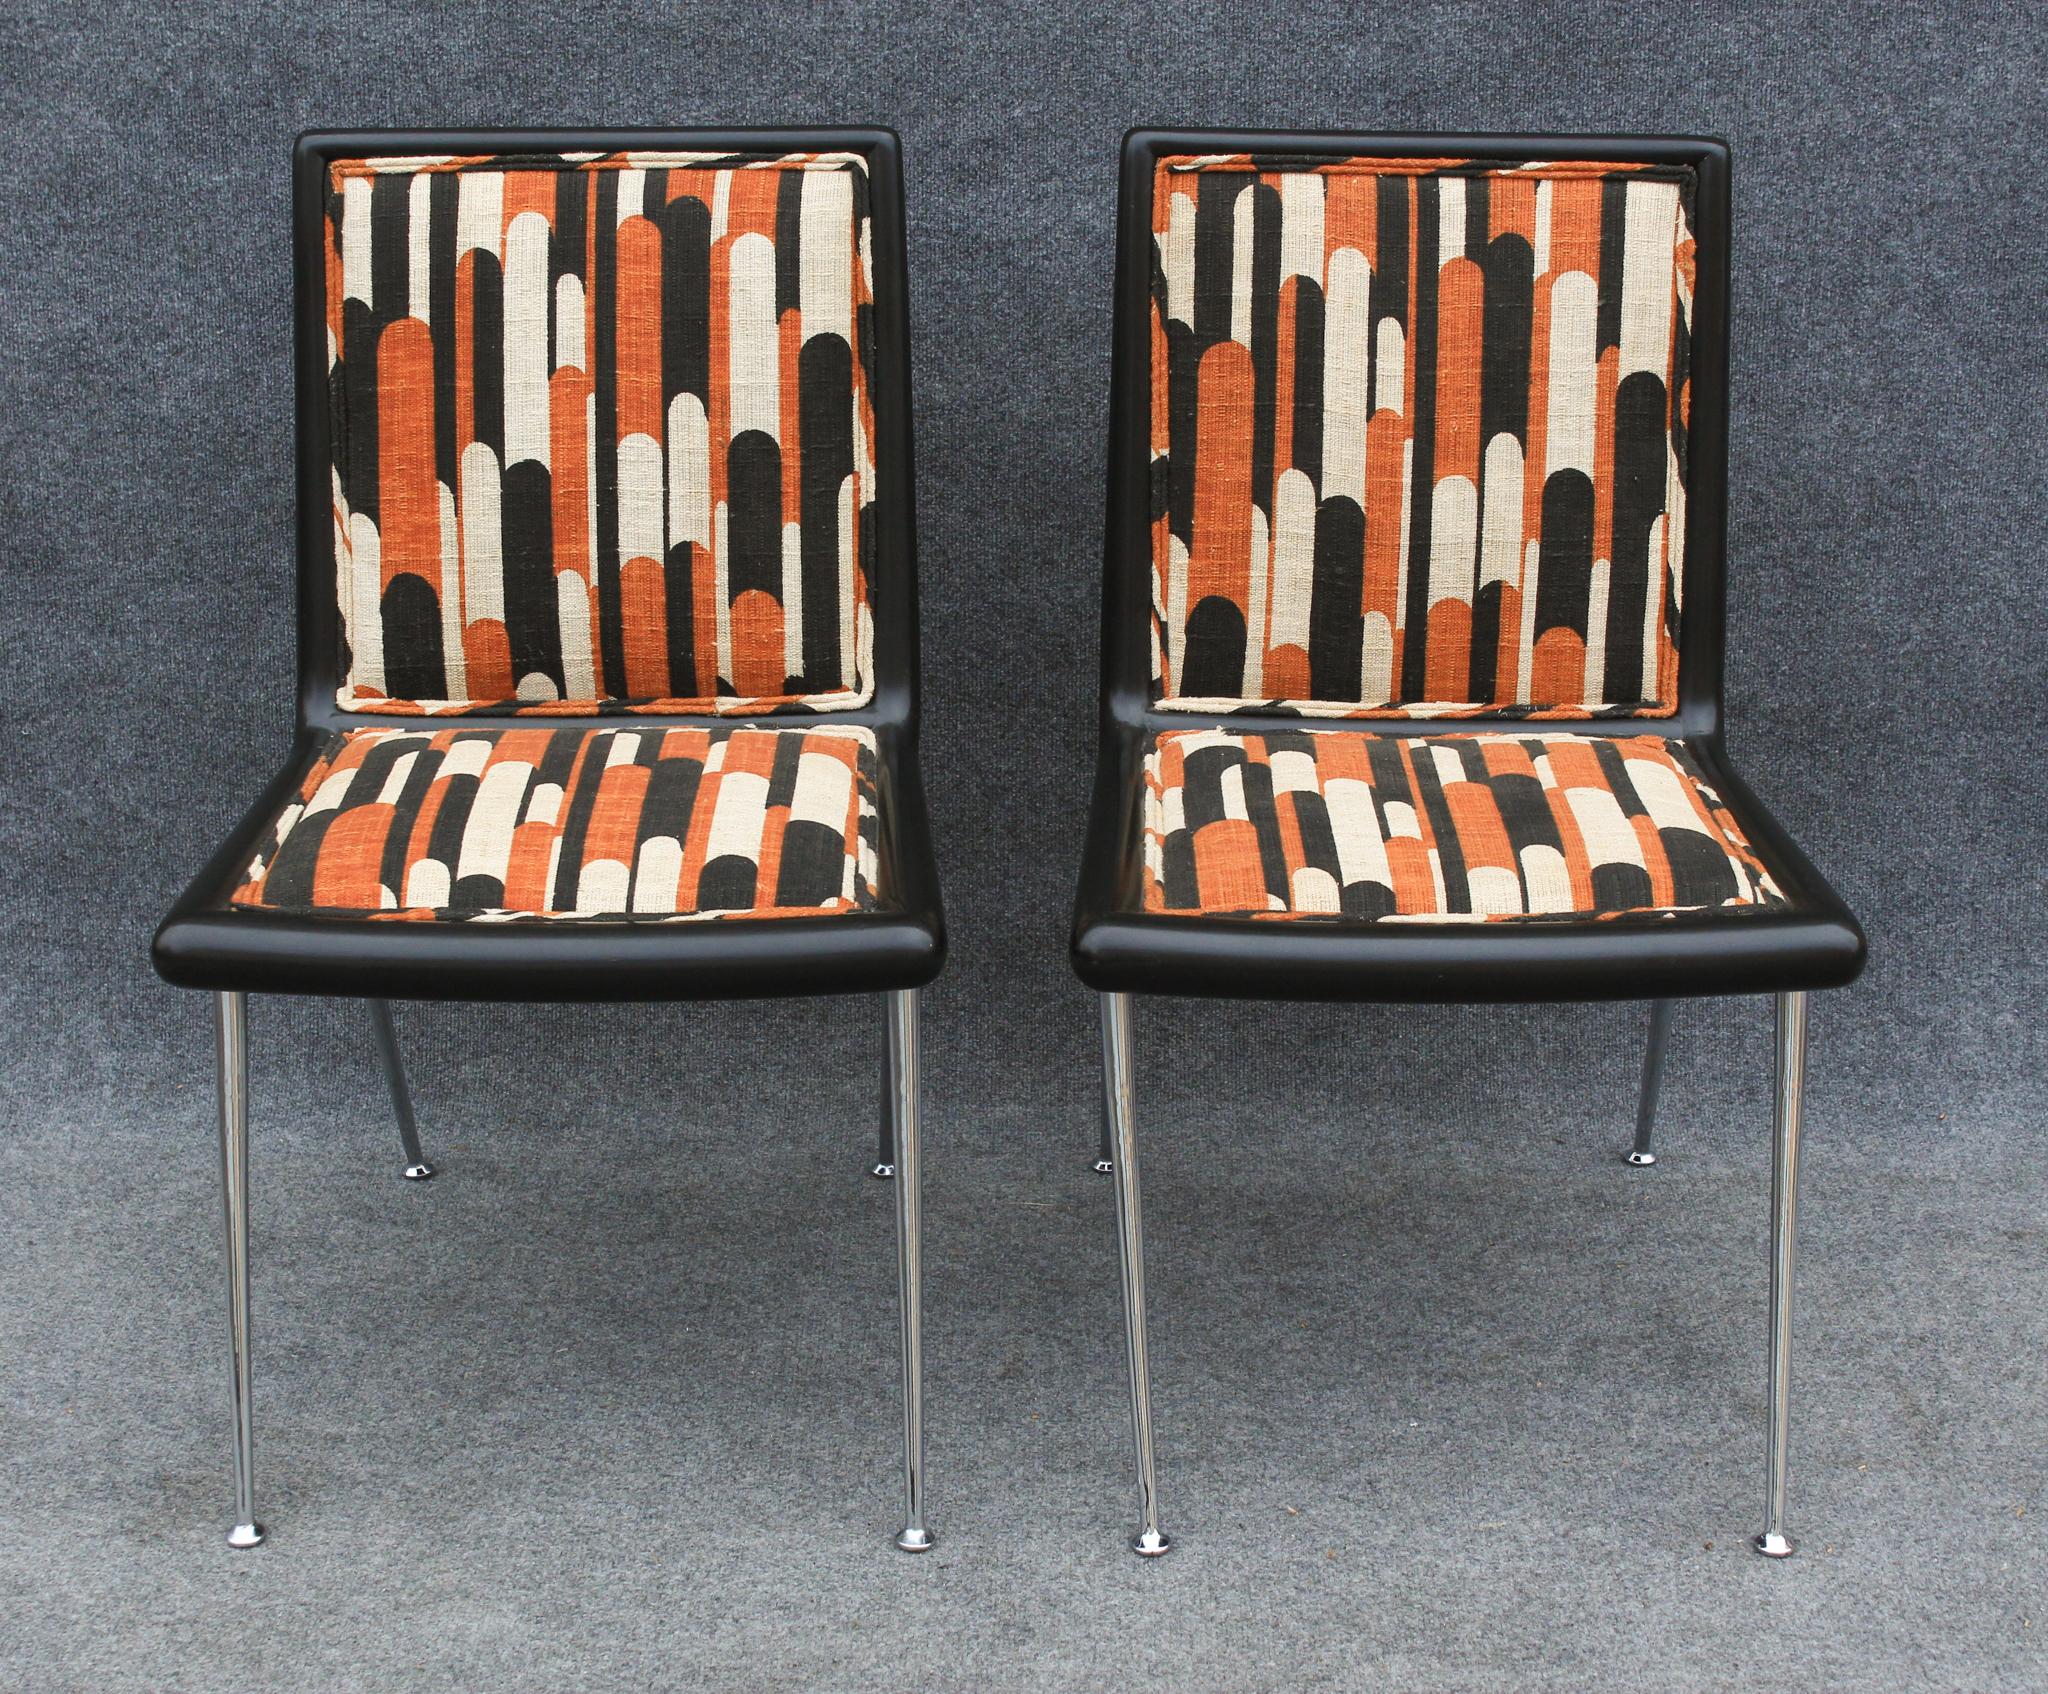 Designed by T.H. Robsjohn Gibbings in the 1960s, these chairs were part of a long-running partnership with Widdicomb. Of the many successful pieces they made, these are among the rarest, even more exclusive than the lounge chair version. It also has